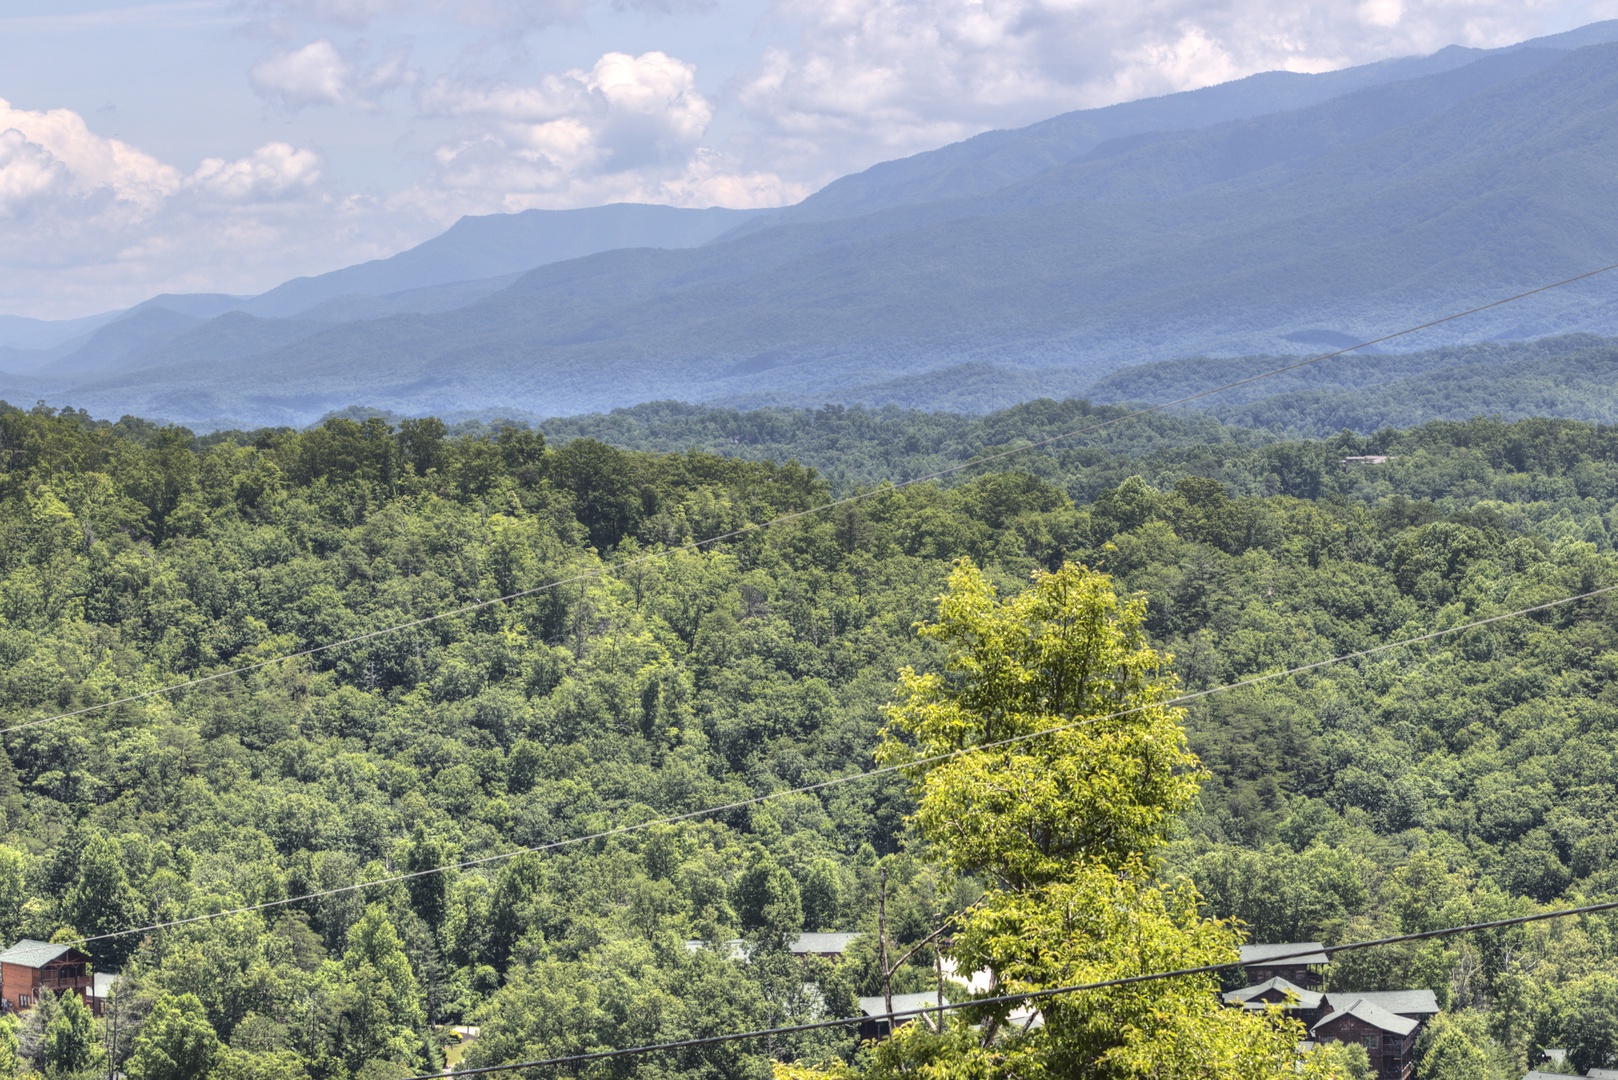 Mountain View at The Best View Lodge, a 5 bedroom cabin rental located in gatlinburg